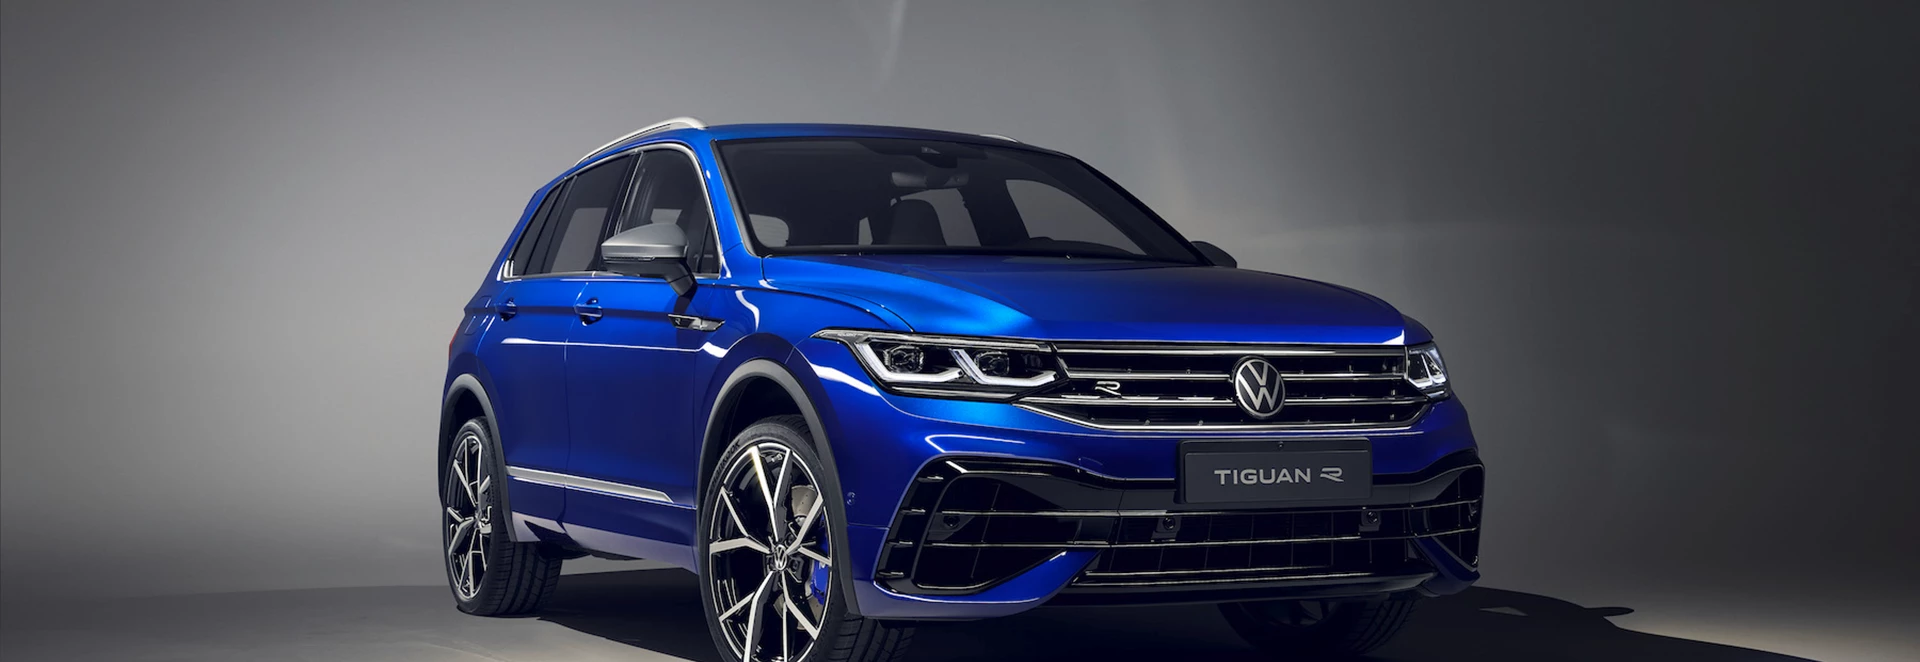 Facelifted Volkswagen Tiguan unveiled with hot ‘R’ model and new plug-in hybrid 